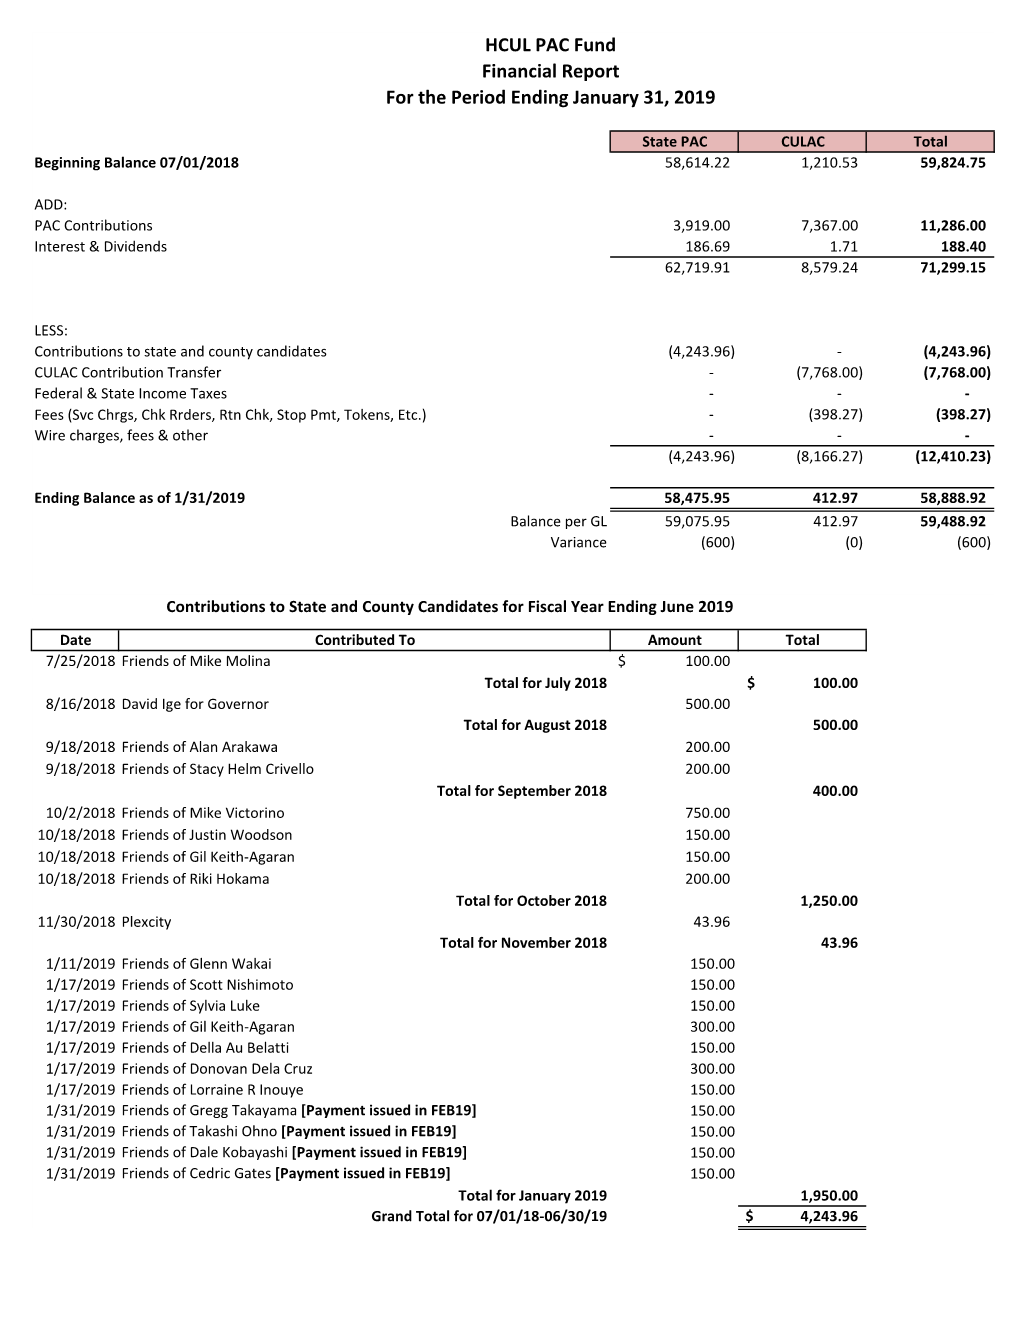 HCUL PAC Fund Financial Report for the Period Ending January 31, 2019